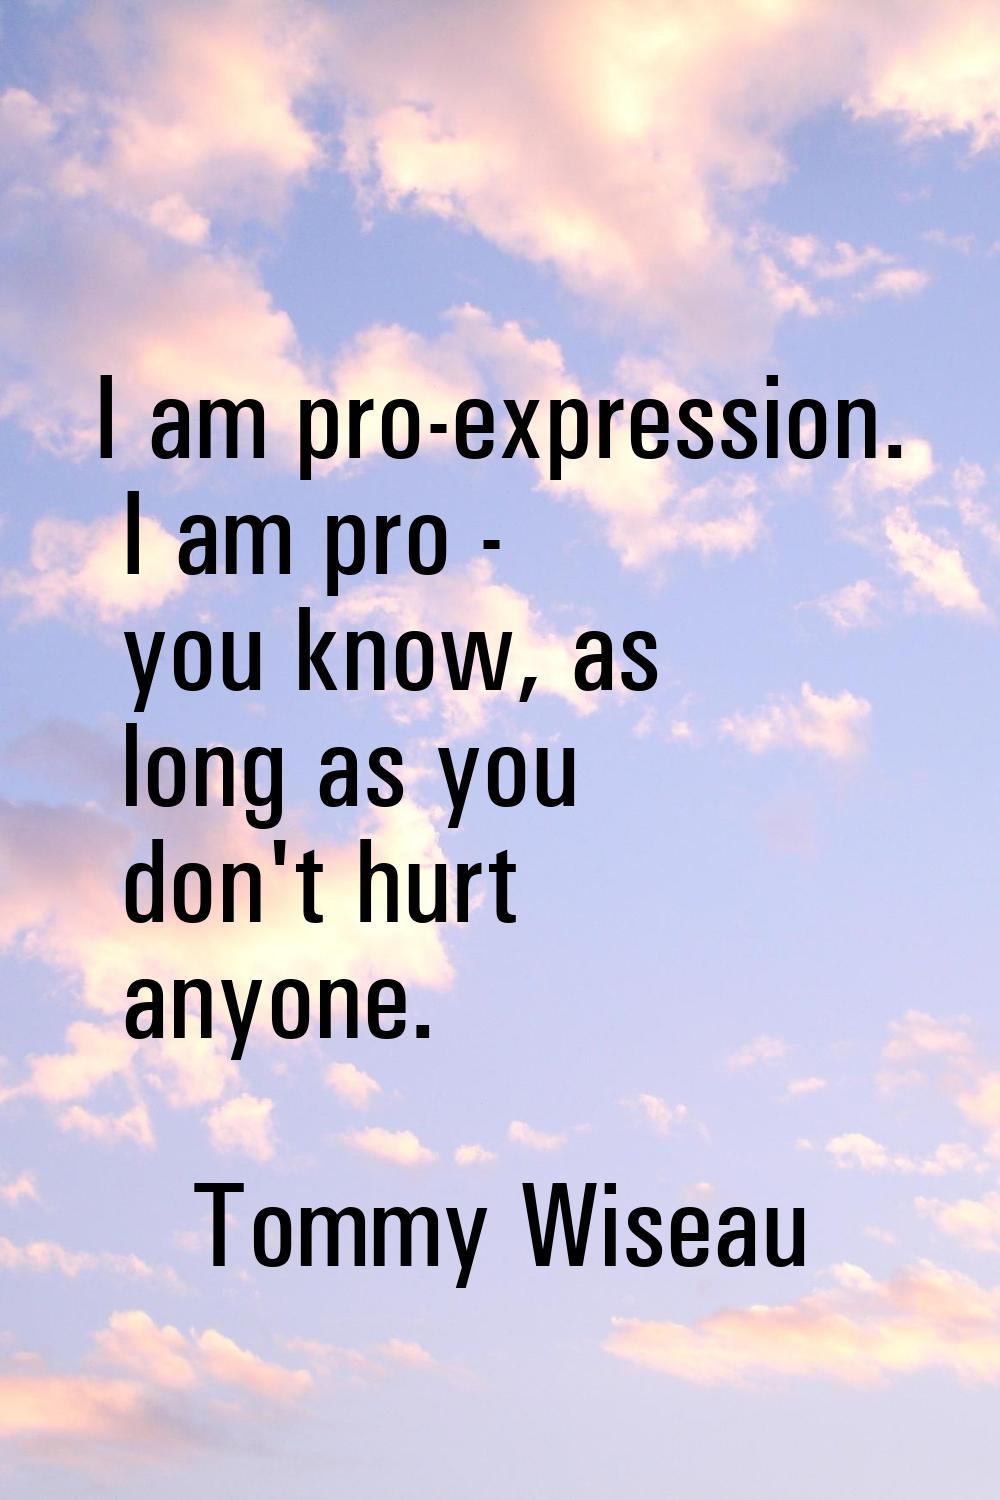 I am pro-expression. I am pro - you know, as long as you don't hurt anyone.